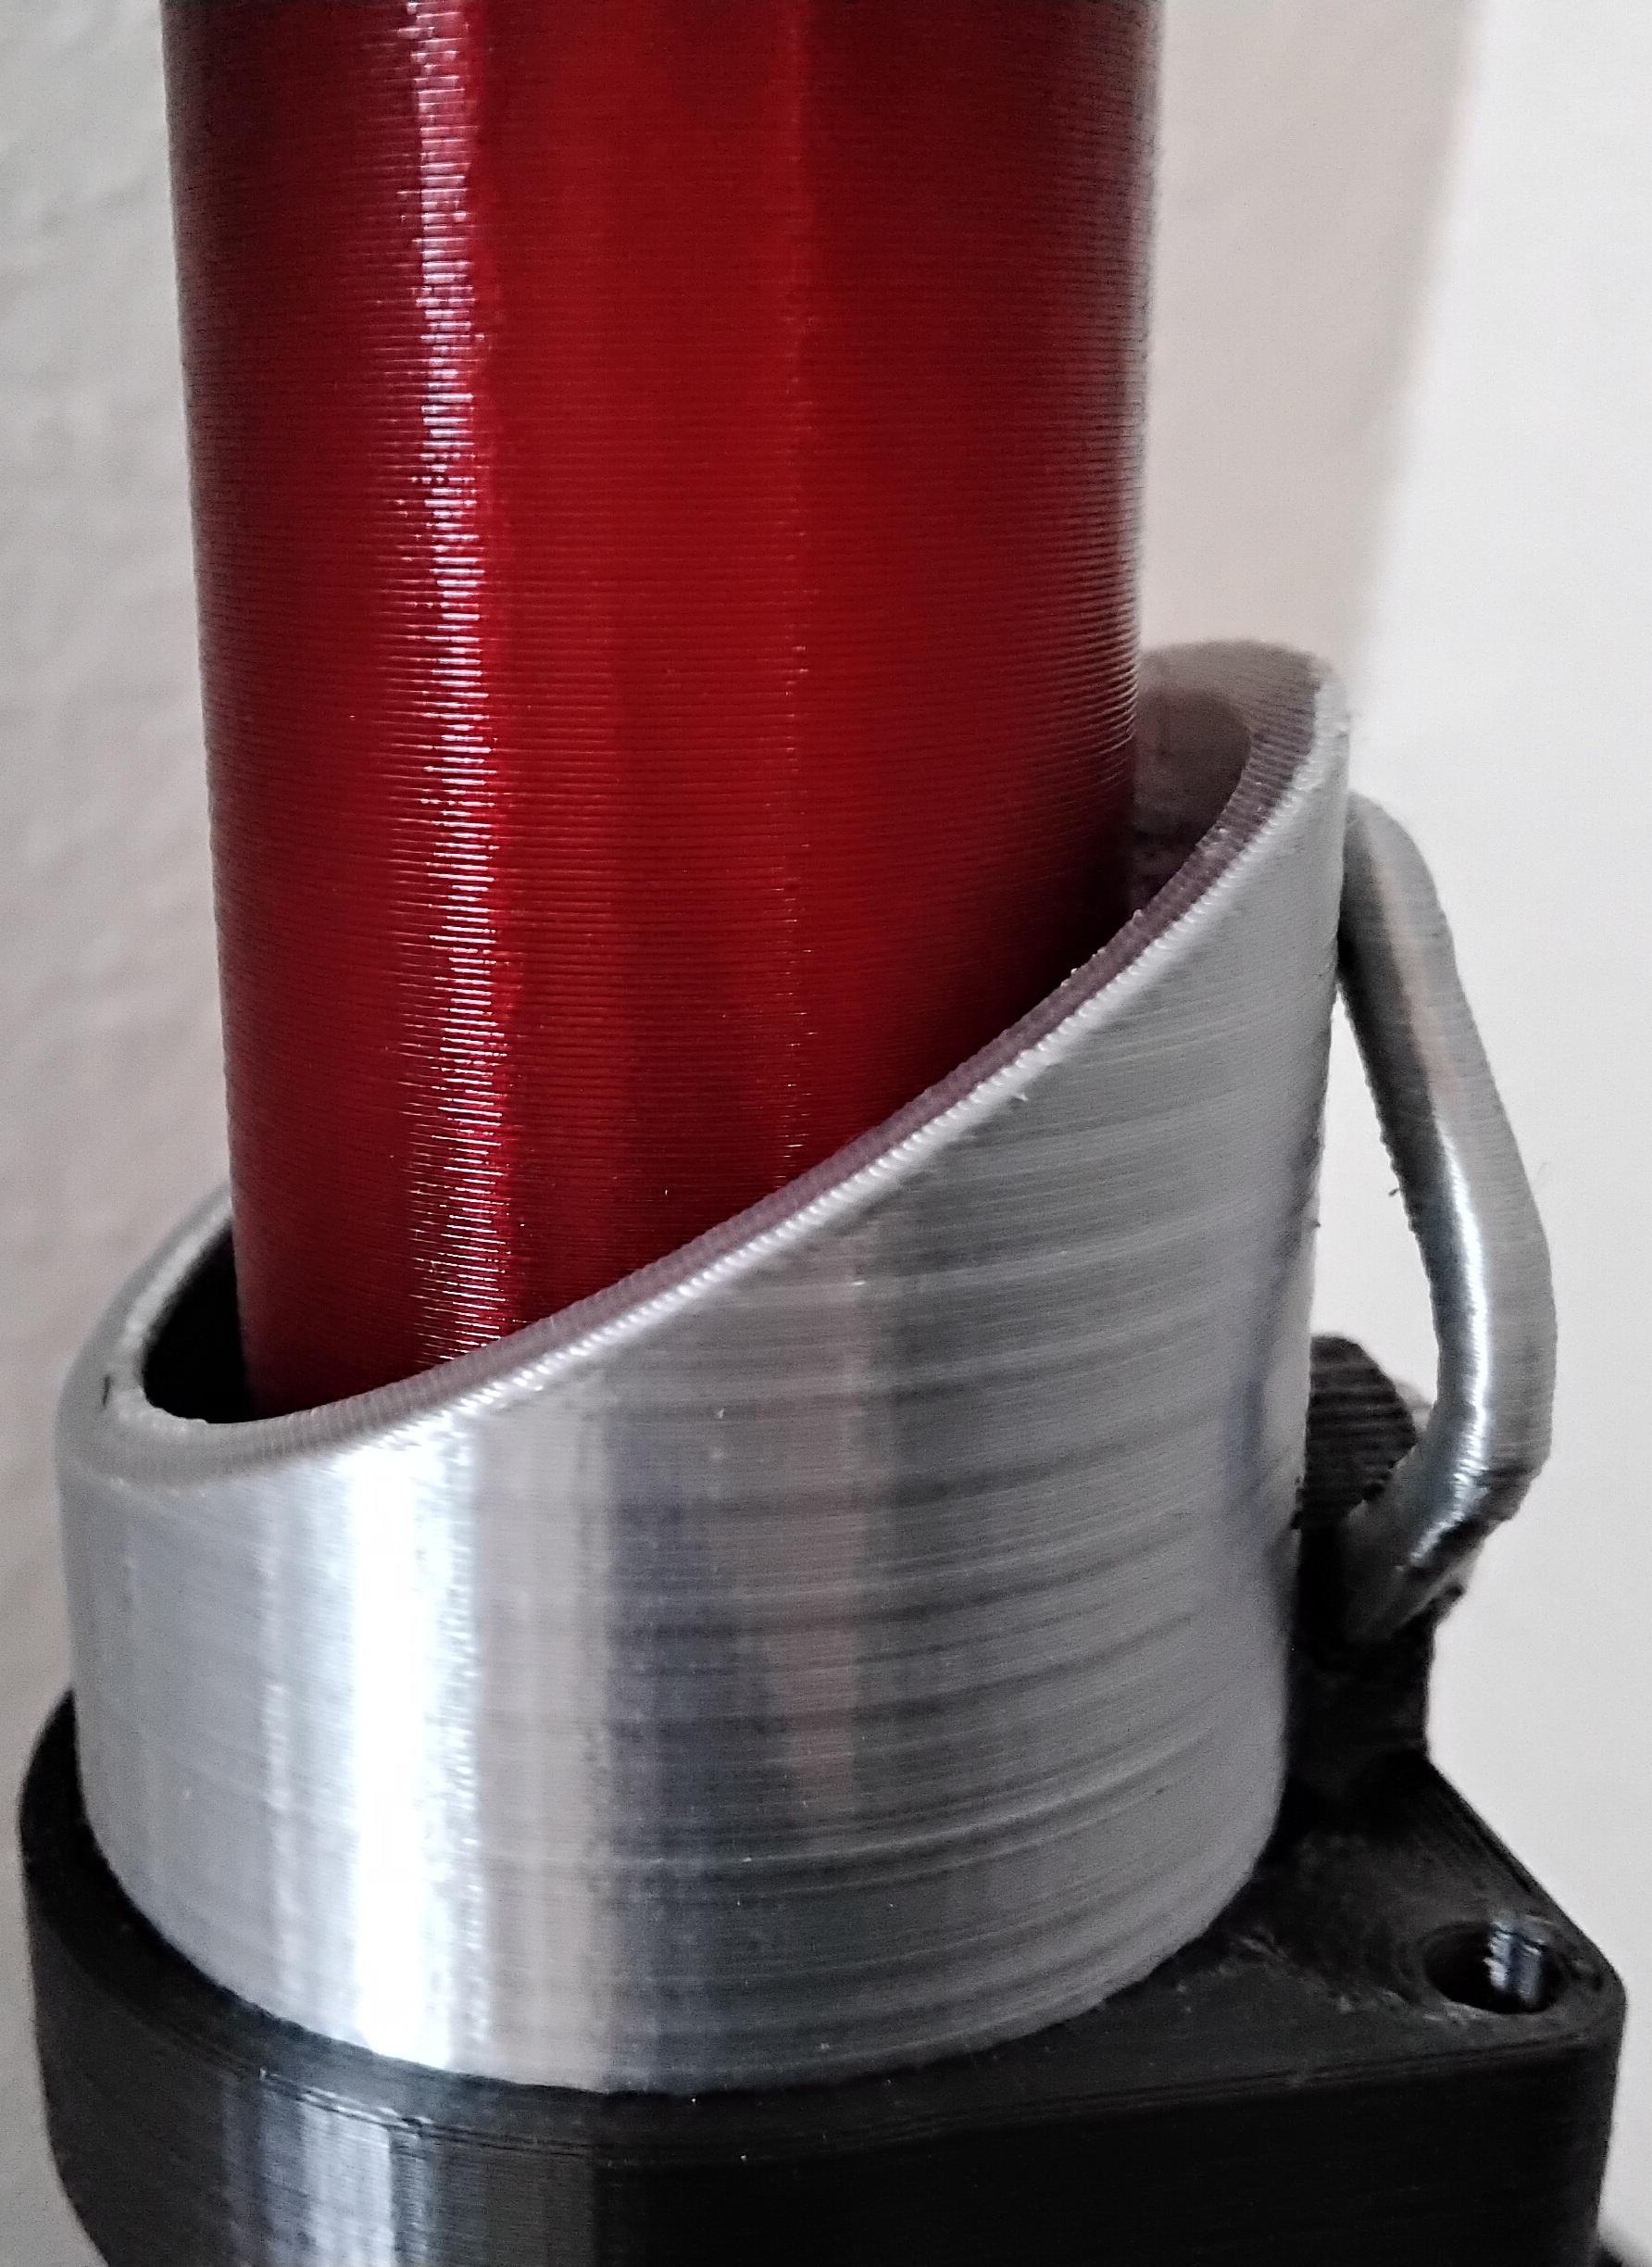 Collapsing Sith Lightsaber (dual extrusion) - could be better but has a used feel to it this way - 3d model